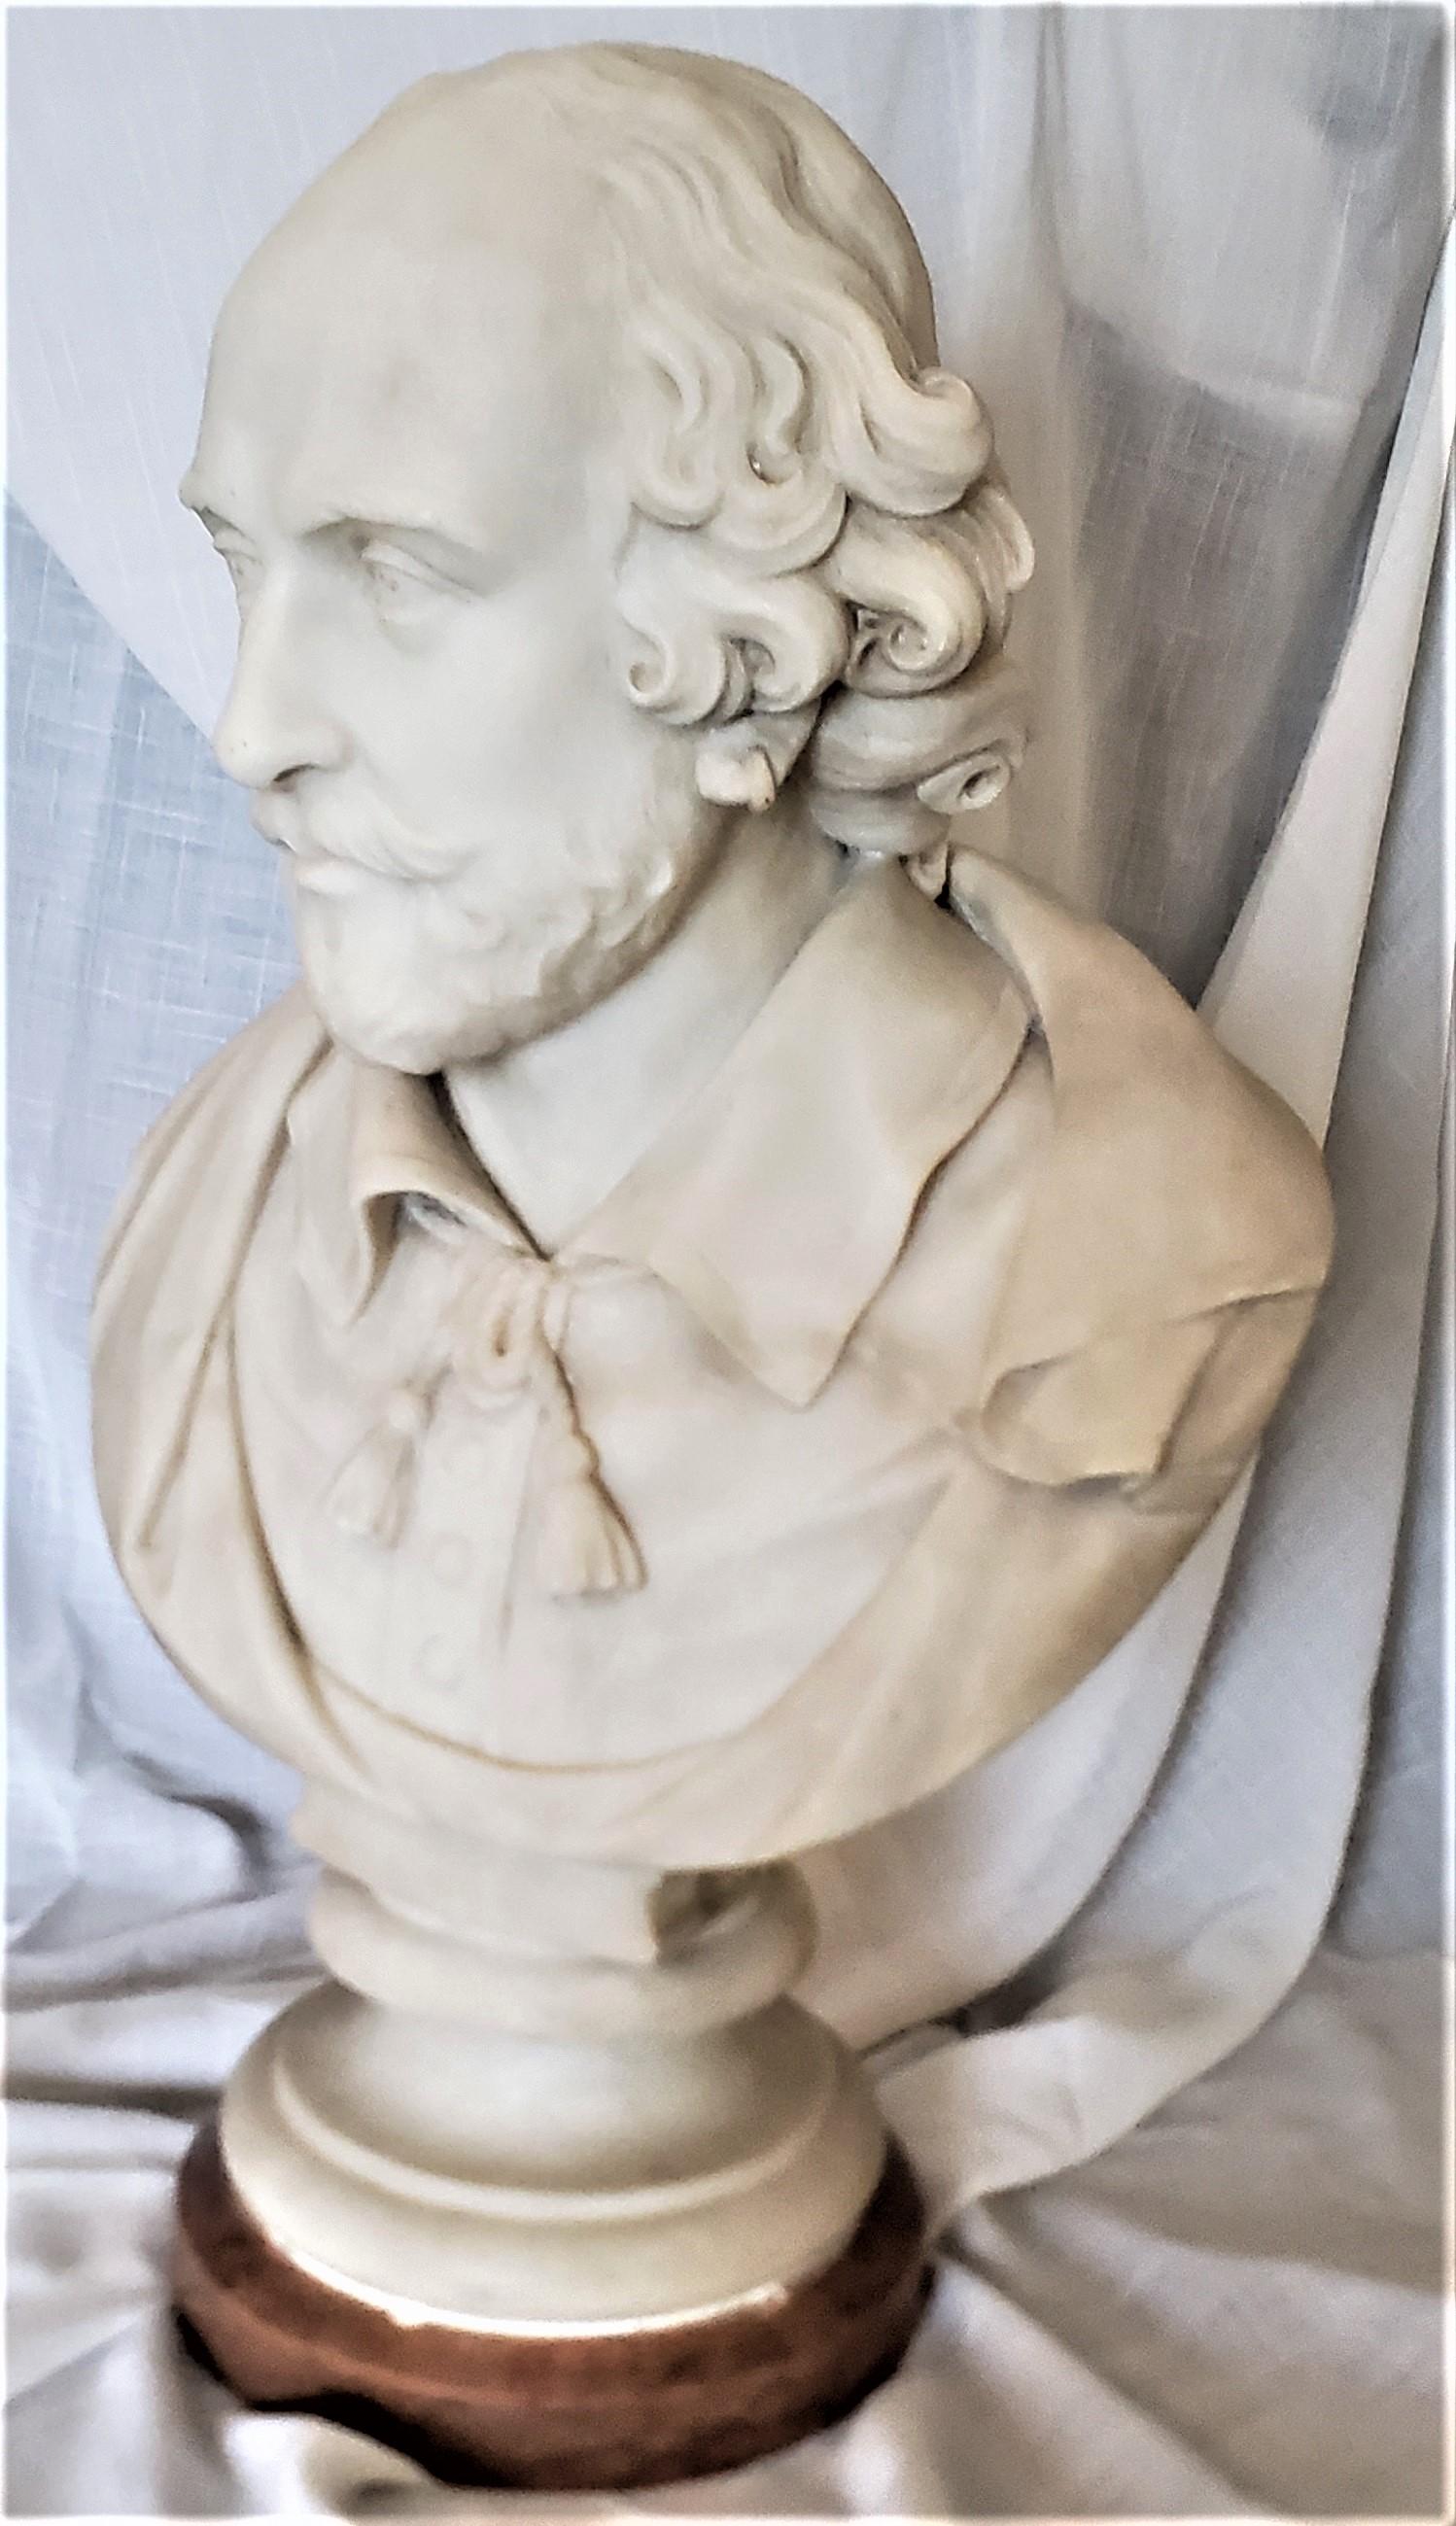 Large Antique English Signed C. Papworth Hand-Carved Marble Bust or Sculpture In Good Condition For Sale In Hamilton, Ontario